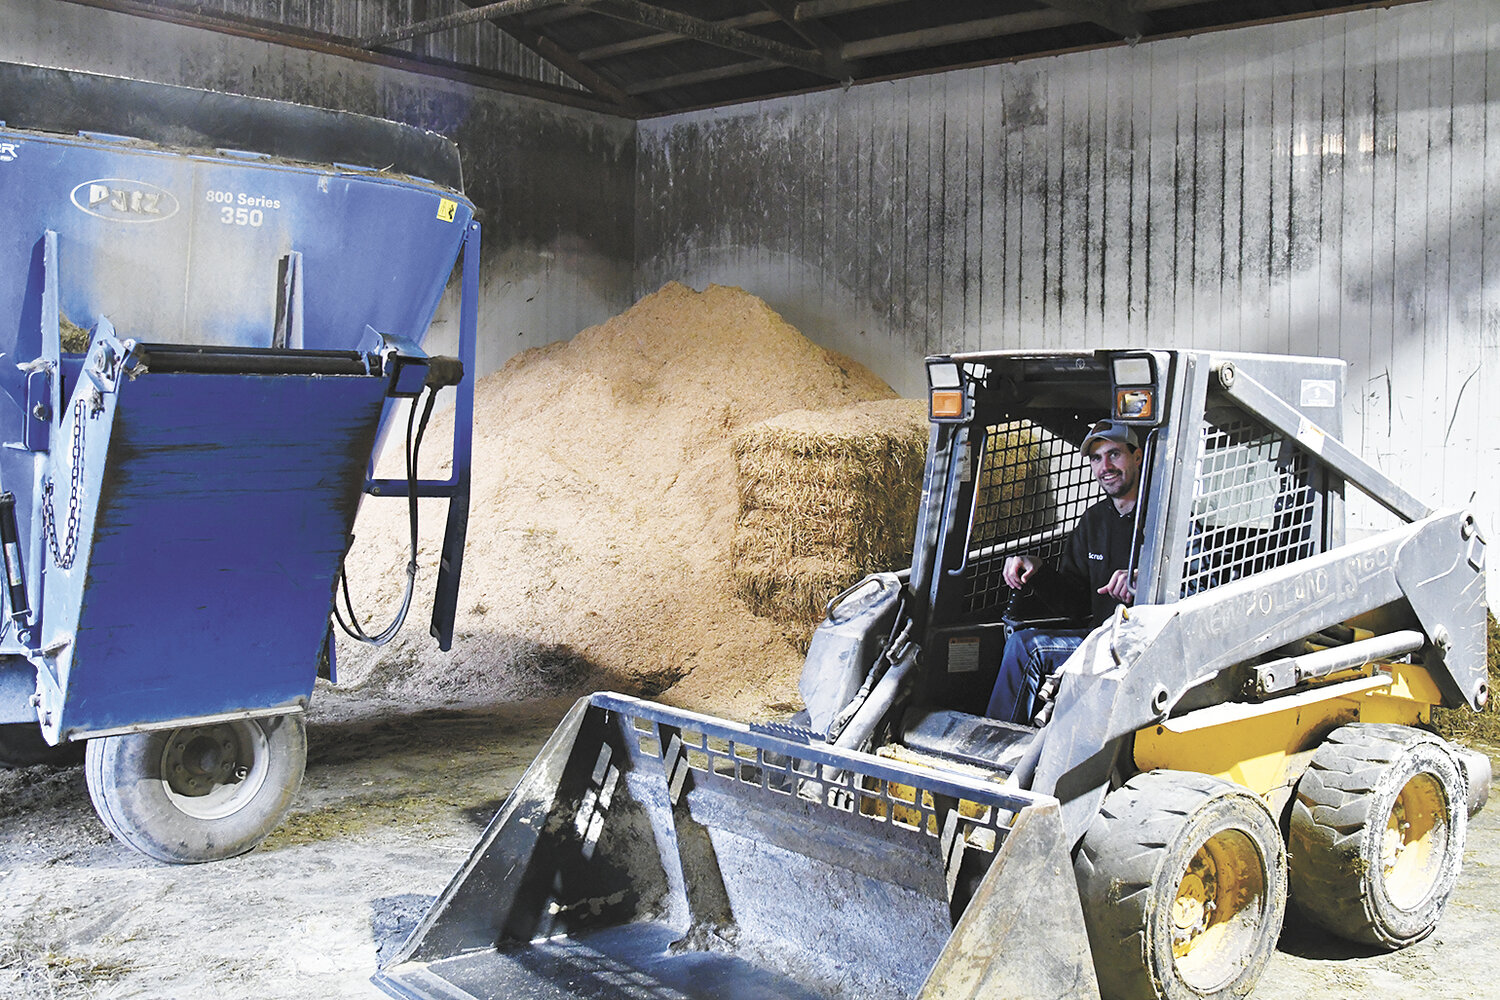 Marshall Friese sits in a skid loader Jan. 5 in the feed room at Rodash-View near Wanamingo, Minnesota. Friese was in this room loading the mixer with this skid loader when he leaned out to remove hay blocking his view of the scale. When the skid loader crept forward, he became crushed between the skid loader and the mixer.